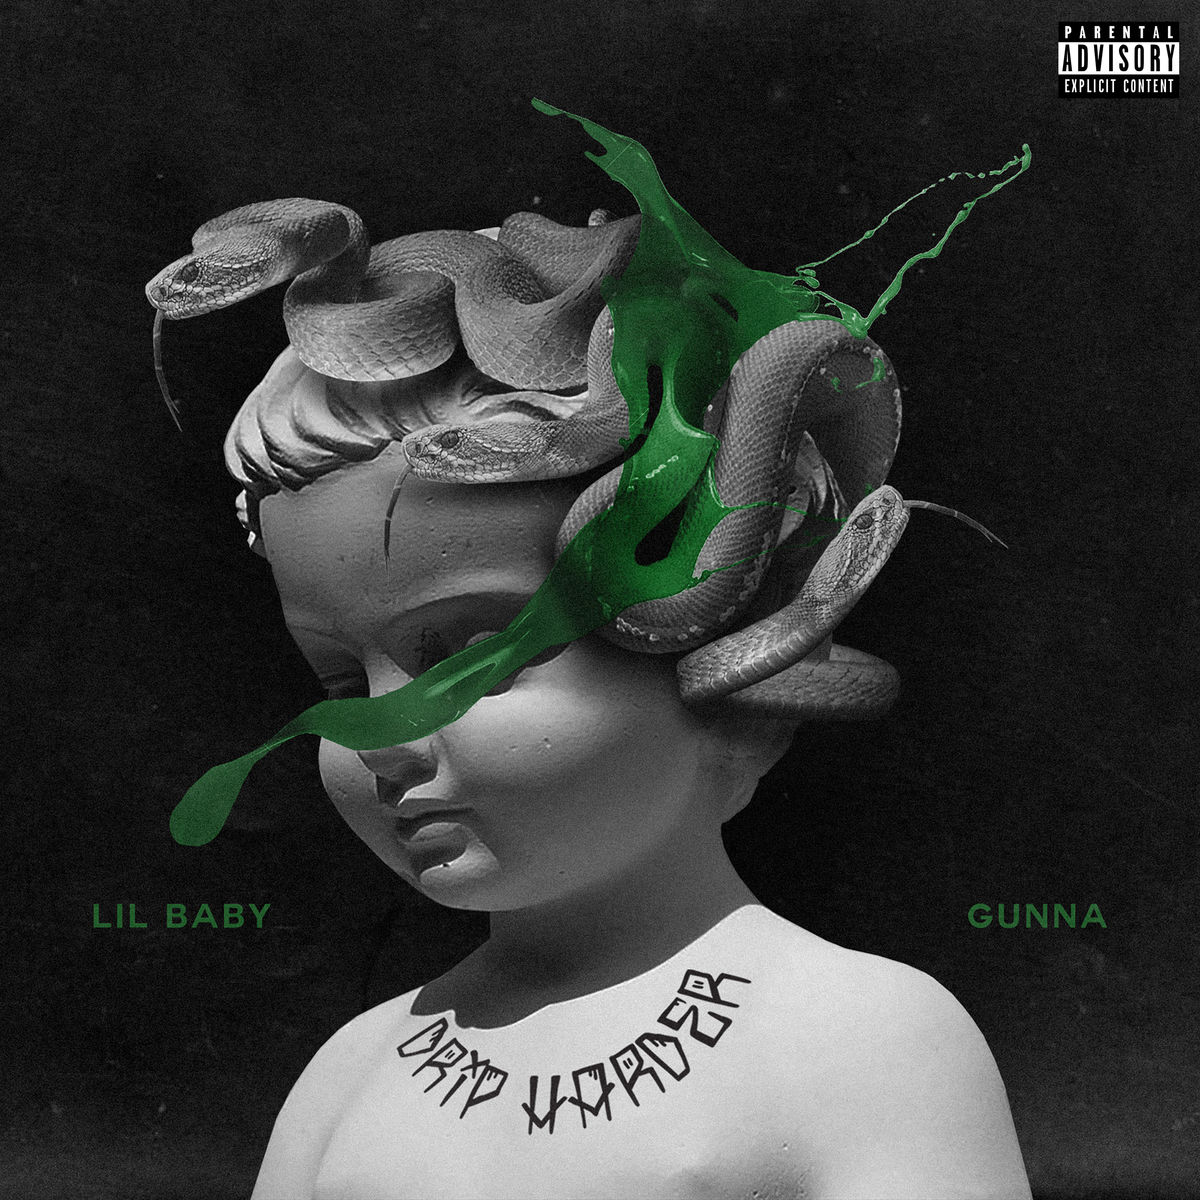 Lil Baby & Gunna Release Joint Project 'Drip Harder'